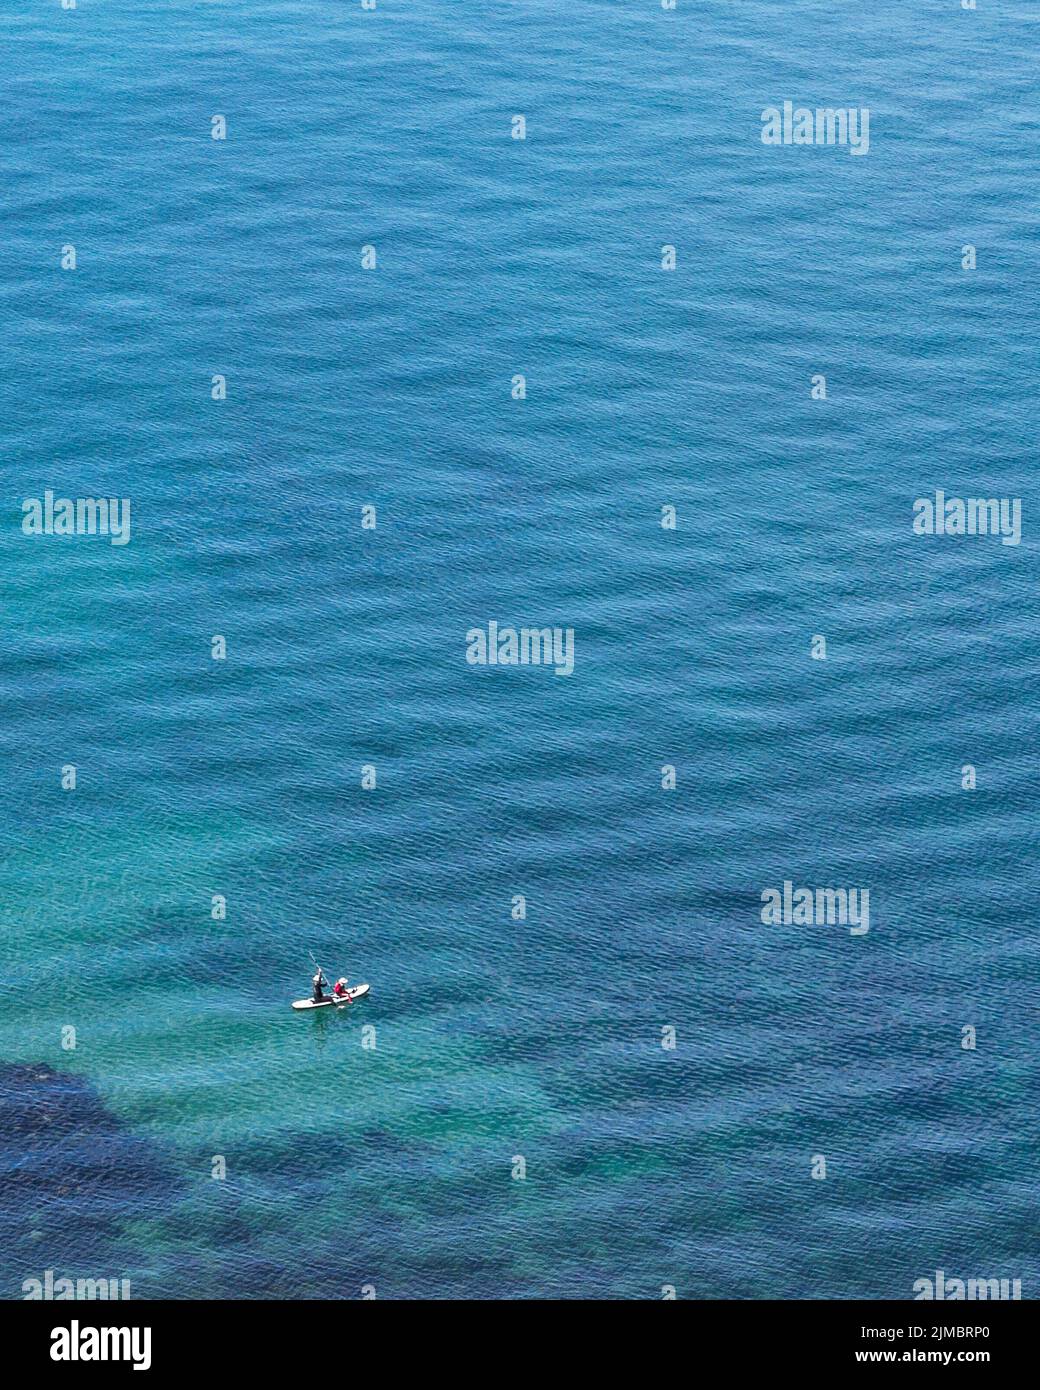 A couple paddle boarding off the coast look minuscule against the vastness of the sea. Health, fitness, holiday, vacation, adventure concept. Stock Photo